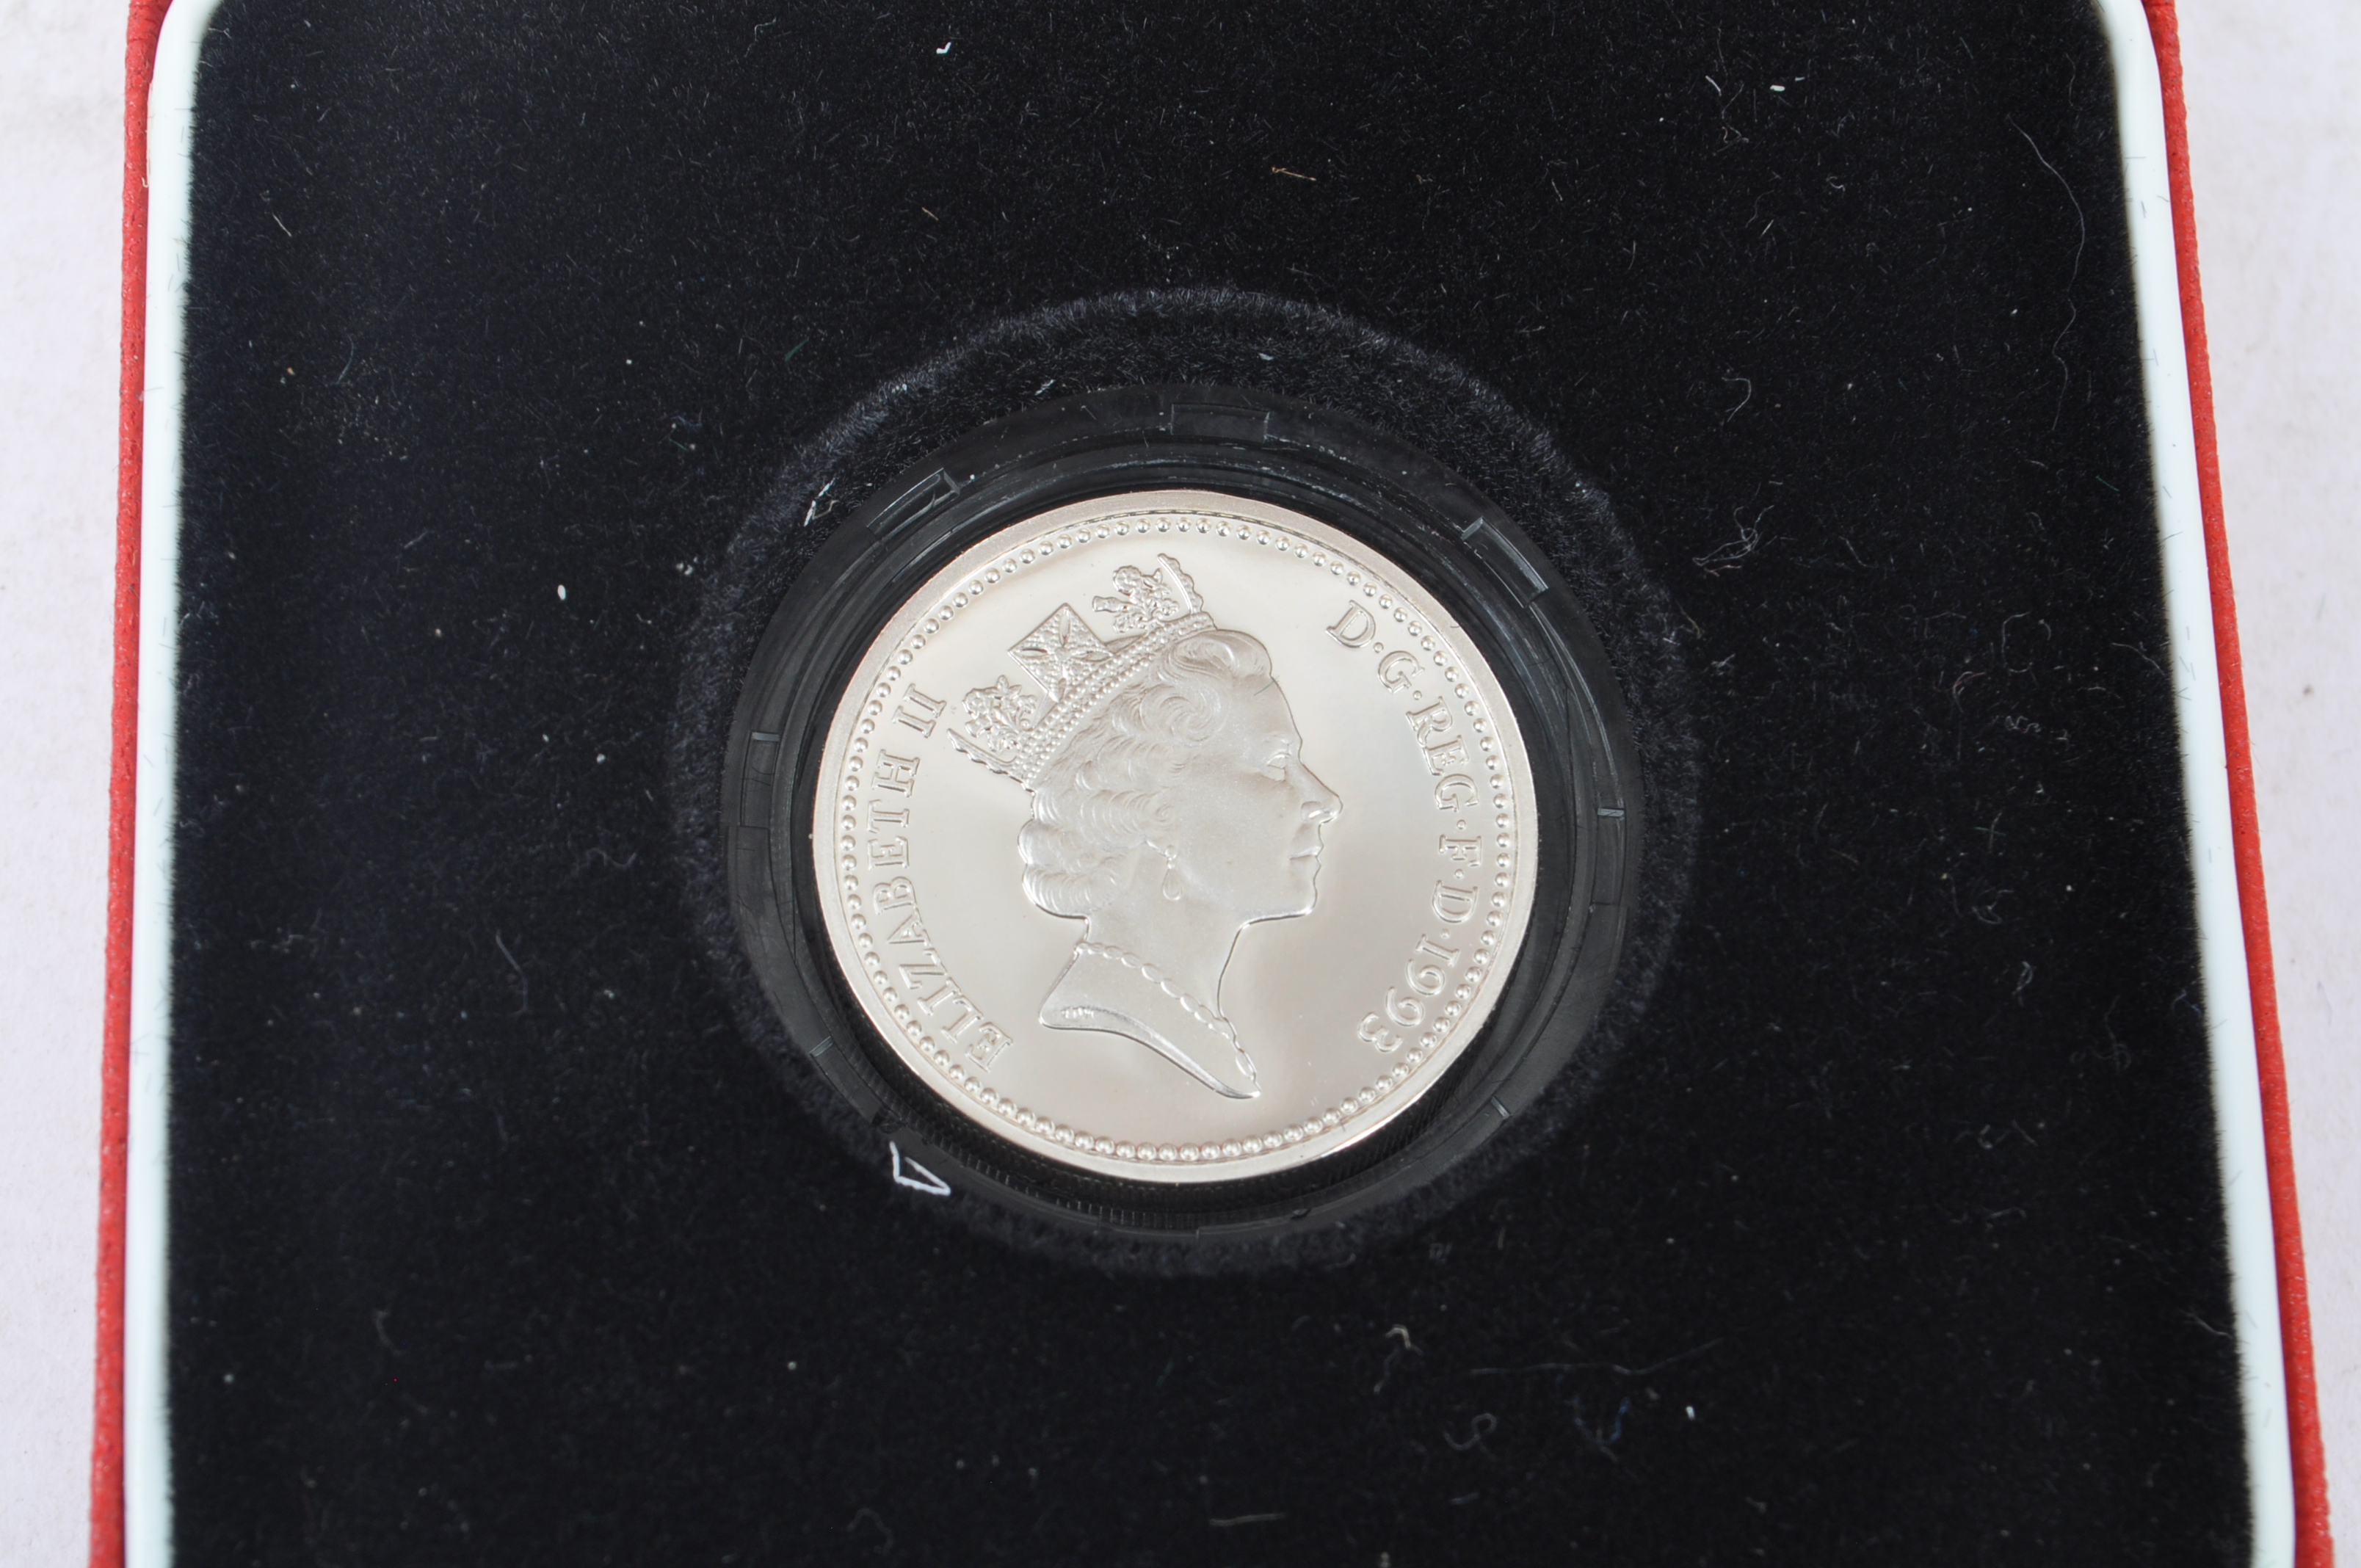 THE ROYAL MINT - UNITED KINGDOM - GROUP OF SILVER PROOF COINS - Image 8 of 9